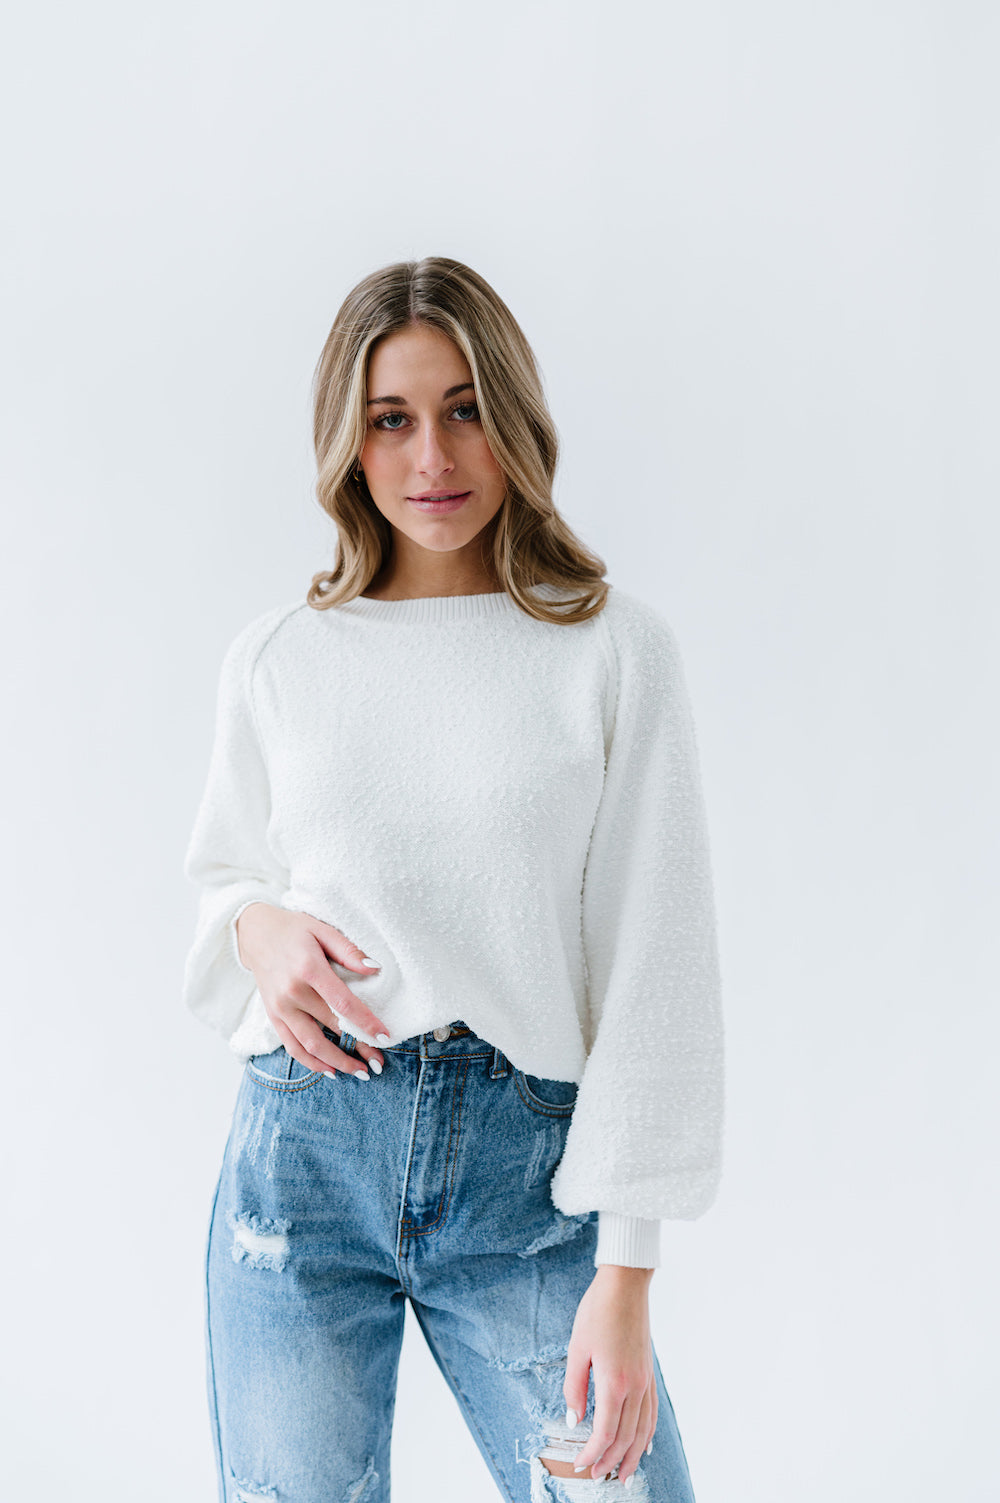 White sweater with long billowy sleeves